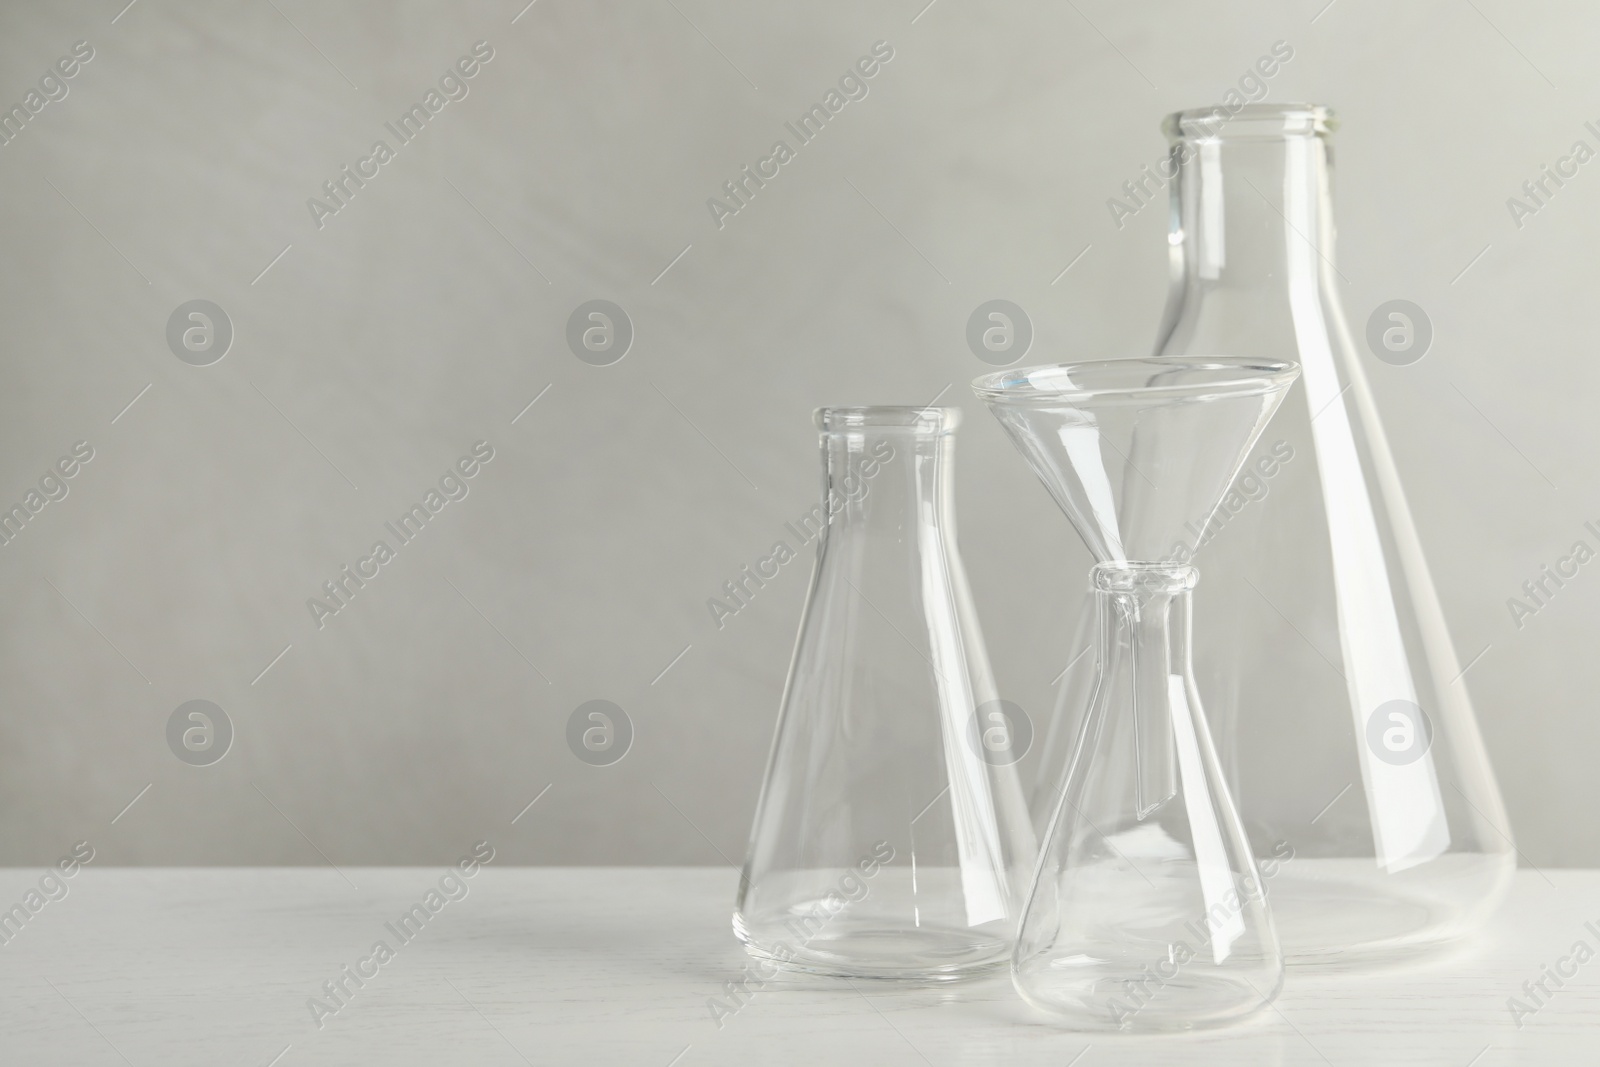 Photo of Set of laboratory glassware on white table against grey background, space for text